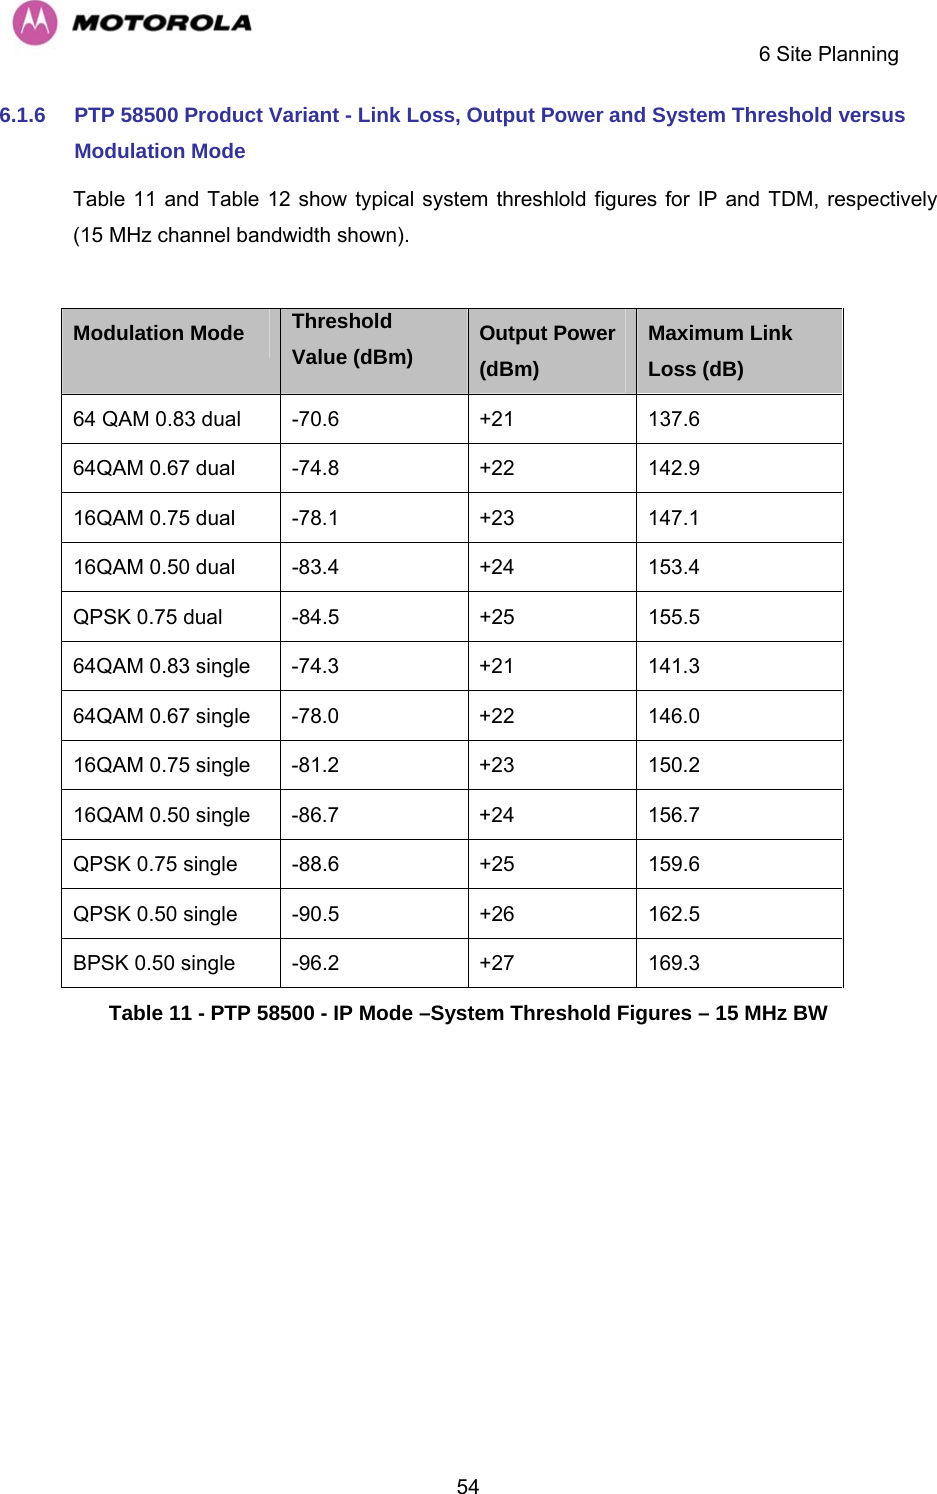     6 Site Planning  546.1.6  PTP 58500 Product Variant - Link Loss, Output Power and System Threshold versus Modulation Mode  Table 11 and Table 12 show typical system threshlold figures for IP and TDM, respectively (15 MHz channel bandwidth shown).  Modulation Mode Threshold Value (dBm) Output Power (dBm) Maximum Link Loss (dB) 64 QAM 0.83 dual  -70.6  +21  137.6 64QAM 0.67 dual  -74.8  +22  142.9 16QAM 0.75 dual  -78.1  +23  147.1 16QAM 0.50 dual  -83.4  +24  153.4 QPSK 0.75 dual  -84.5  +25  155.5 64QAM 0.83 single  -74.3  +21  141.3 64QAM 0.67 single  -78.0  +22  146.0 16QAM 0.75 single  -81.2  +23  150.2 16QAM 0.50 single  -86.7  +24  156.7 QPSK 0.75 single  -88.6  +25  159.6 QPSK 0.50 single  -90.5  +26  162.5 BPSK 0.50 single  -96.2  +27  169.3 Table 11 - PTP 58500 - IP Mode –System Threshold Figures – 15 MHz BW   